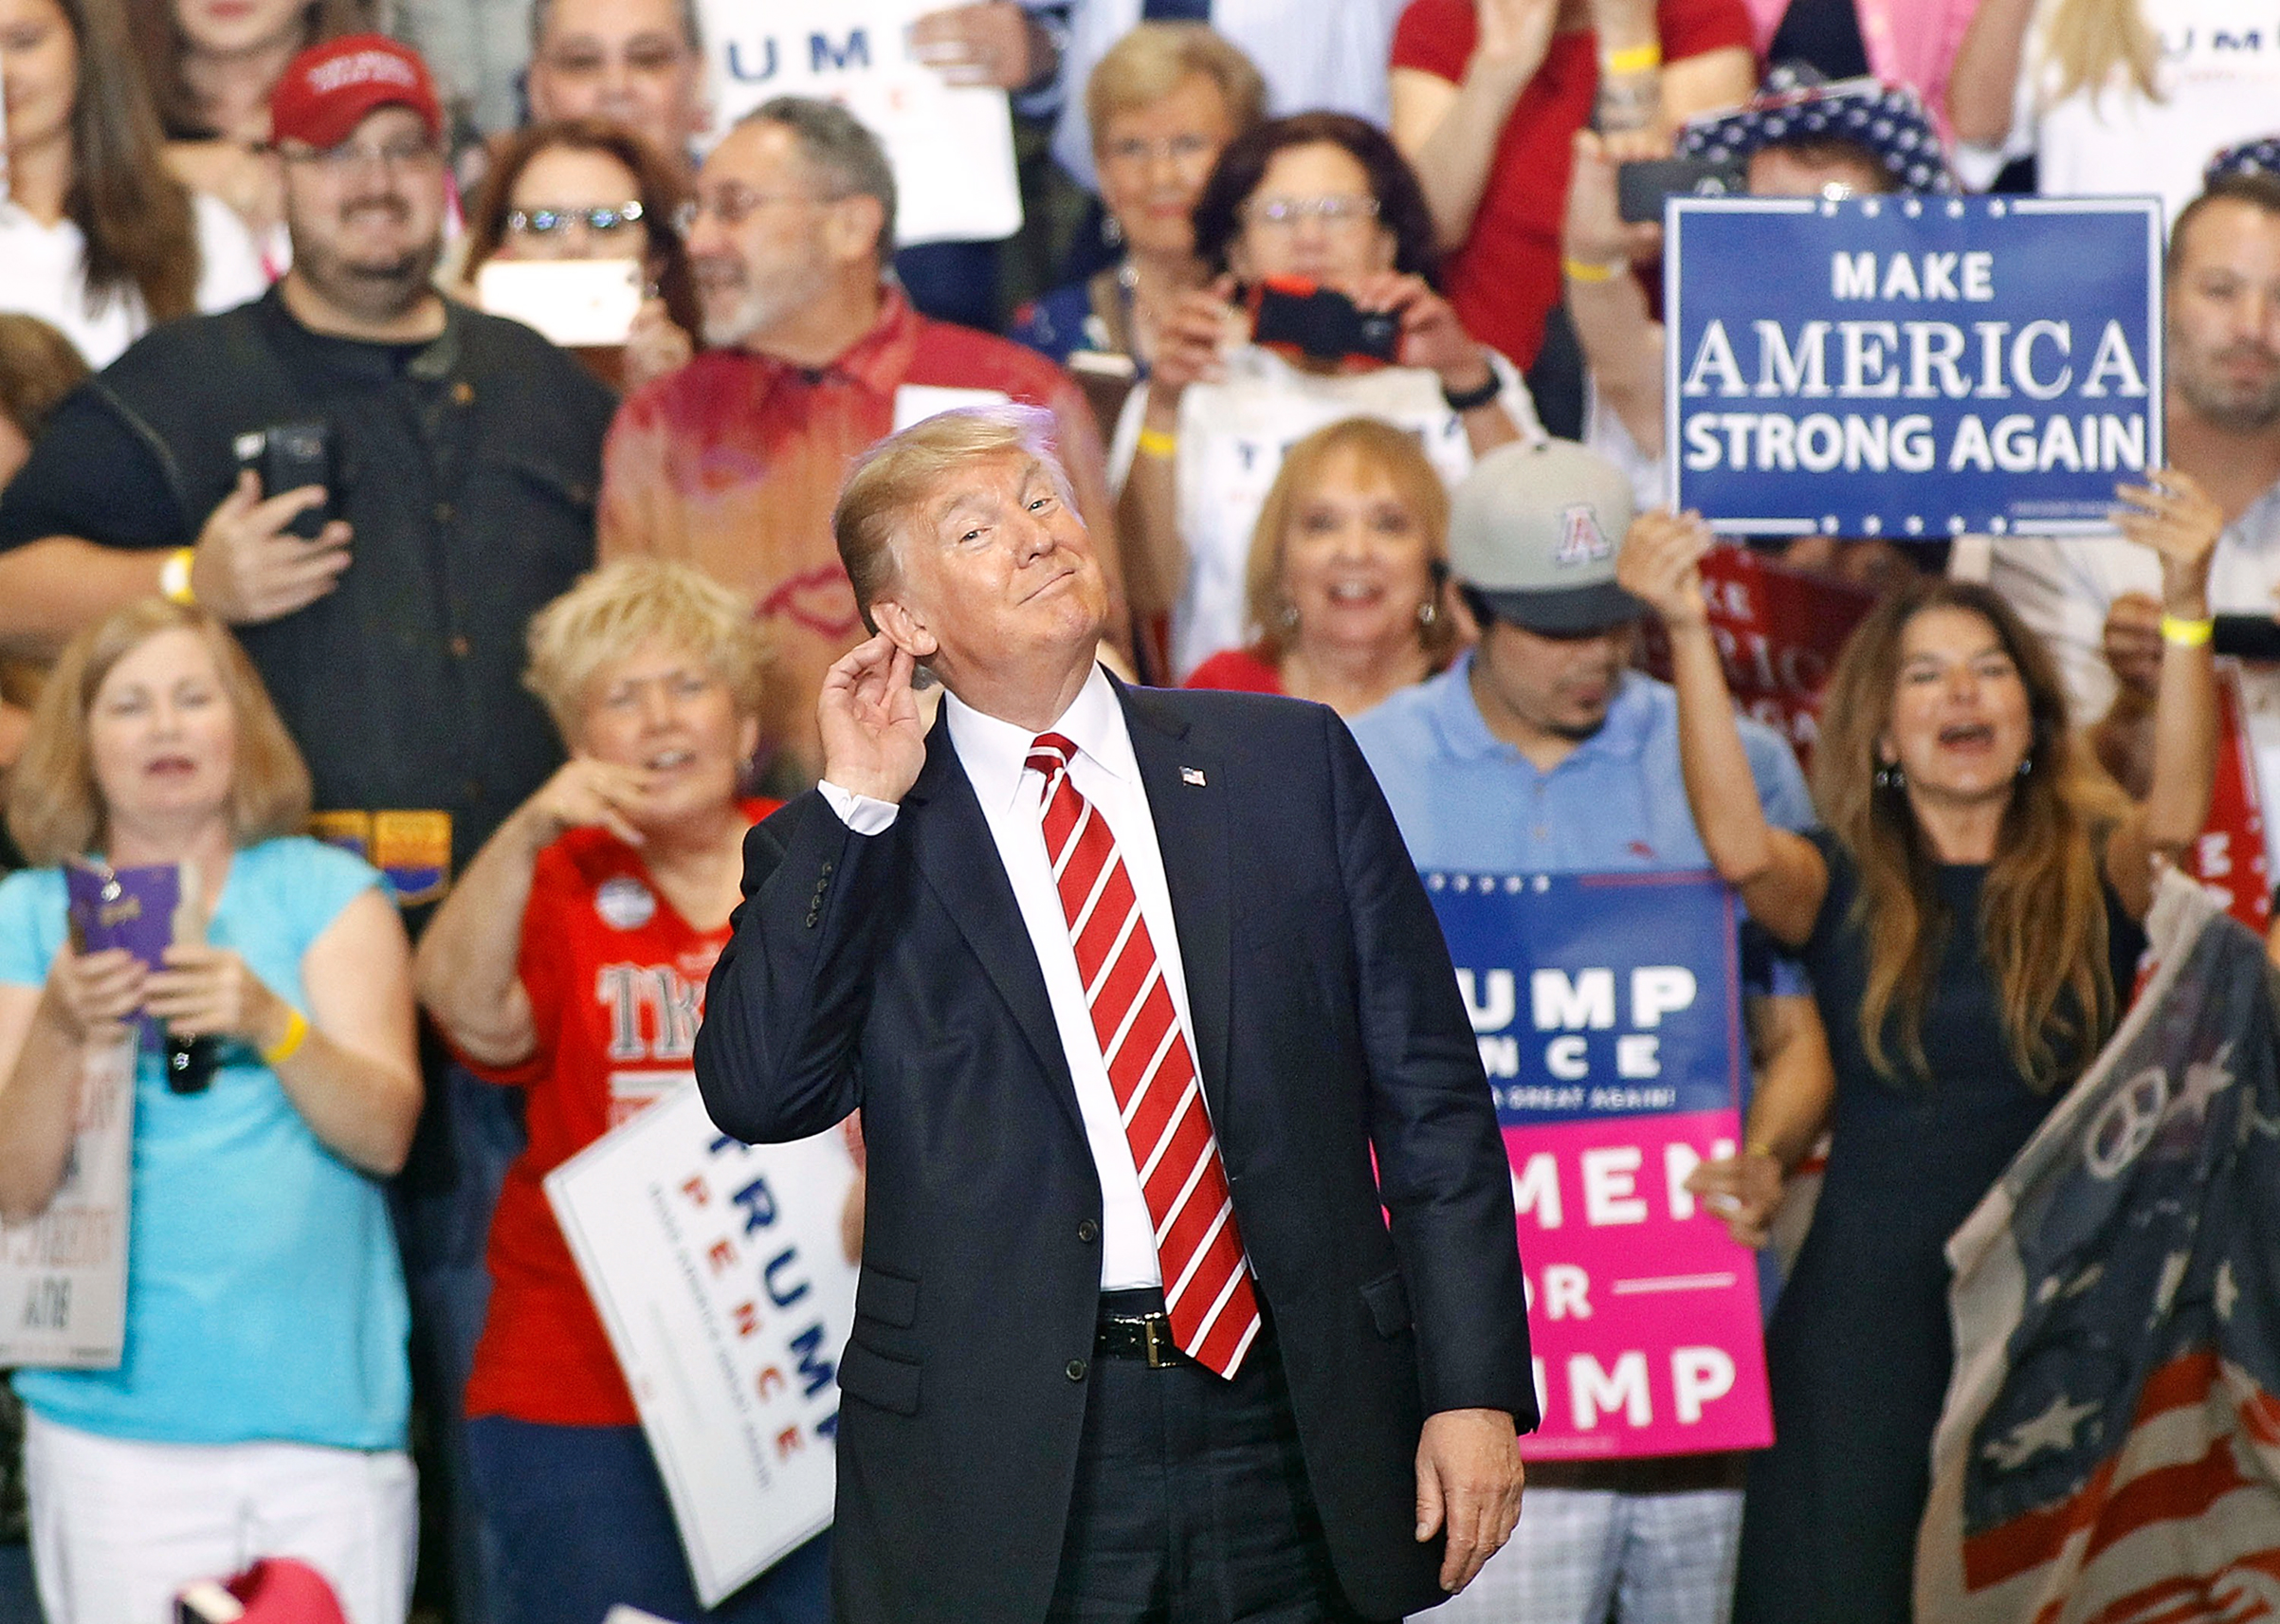 The President attacked the press and fellow Republicans at a raucous Aug. 22 event in Phoenix (Ralph Freso—Getty Images)